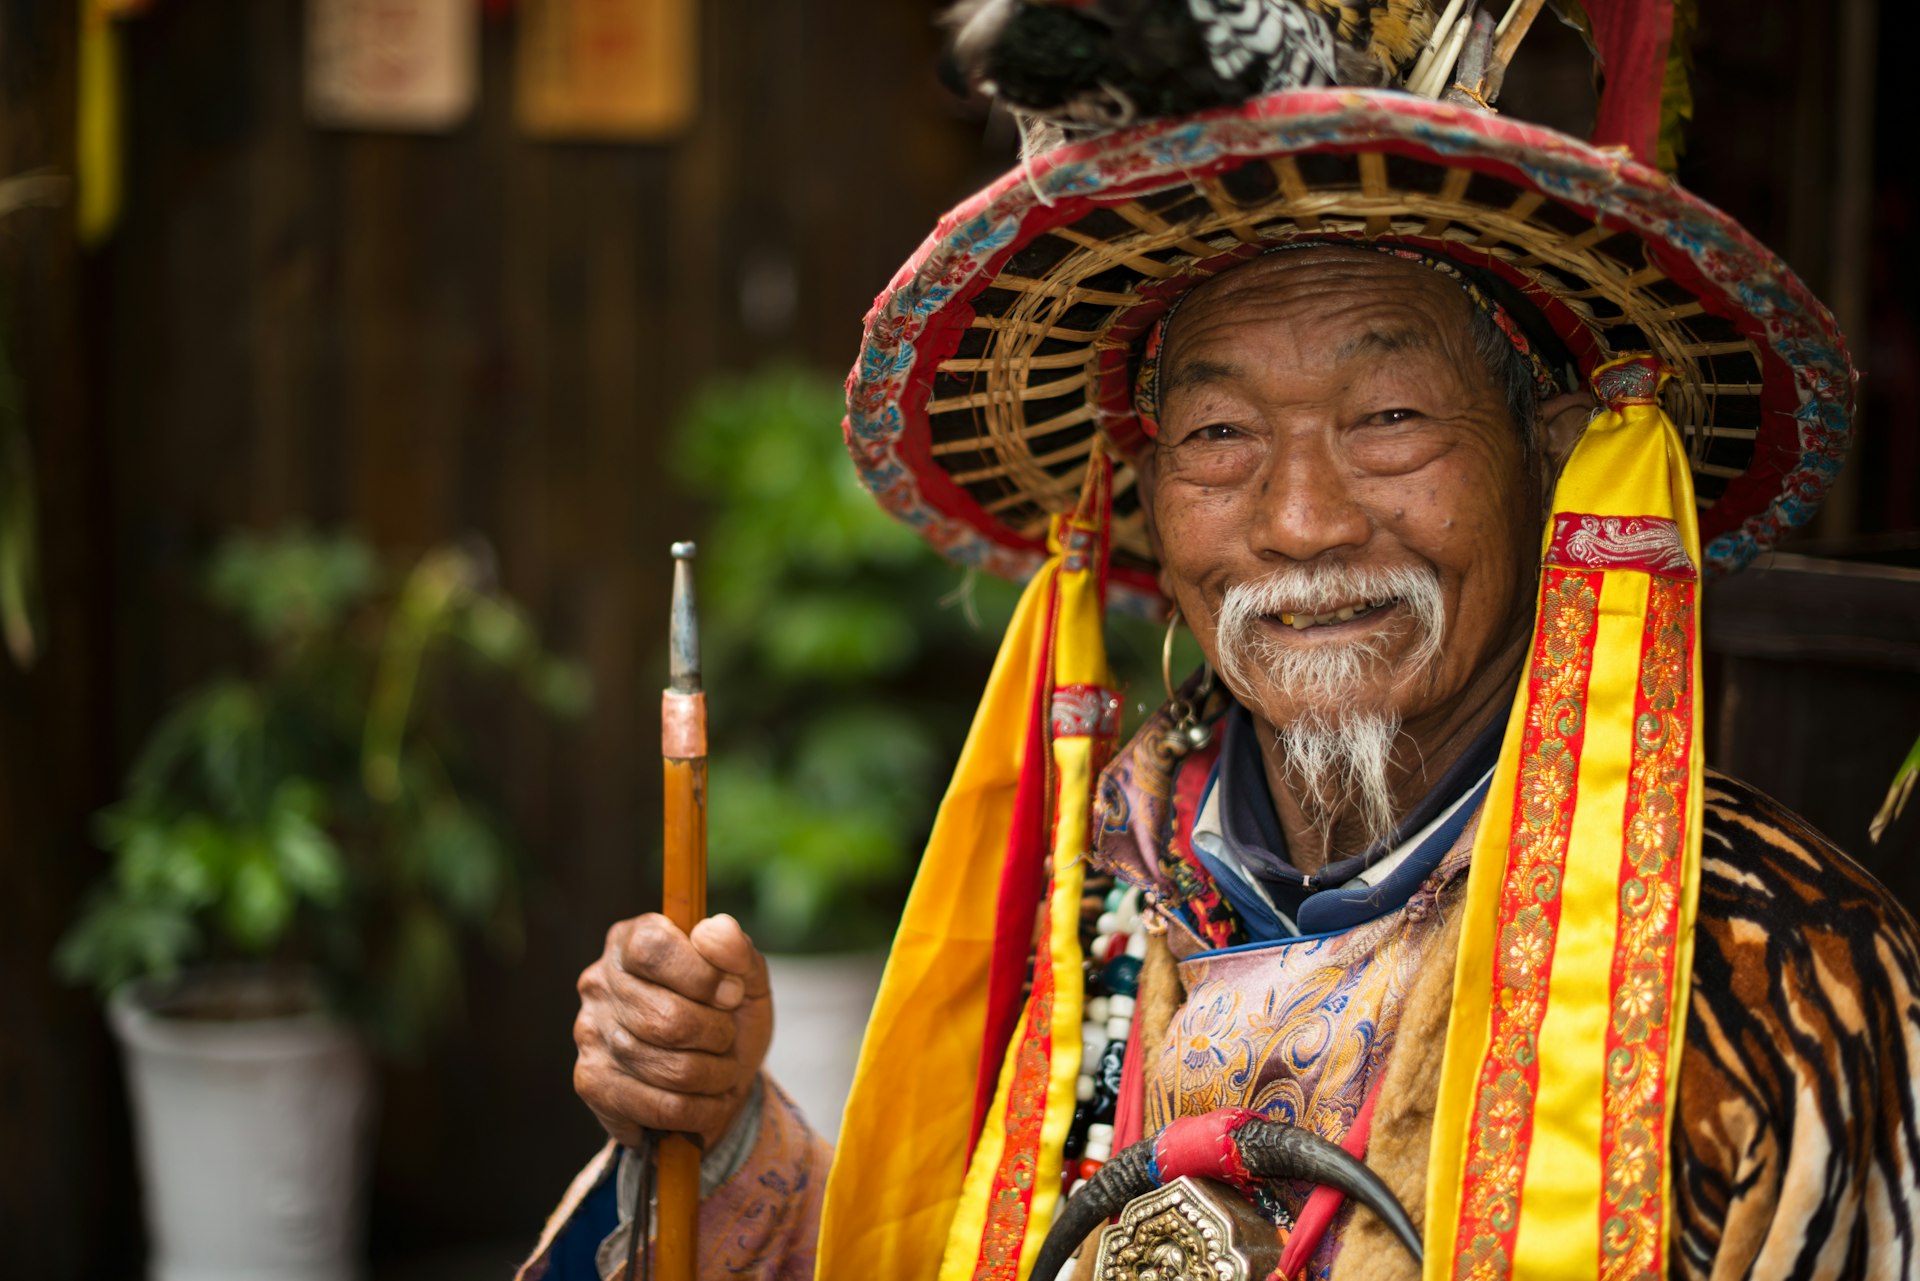 A Naxi nationality old man dressed in ancient Dongba clothing, smiling and welcome the travelers